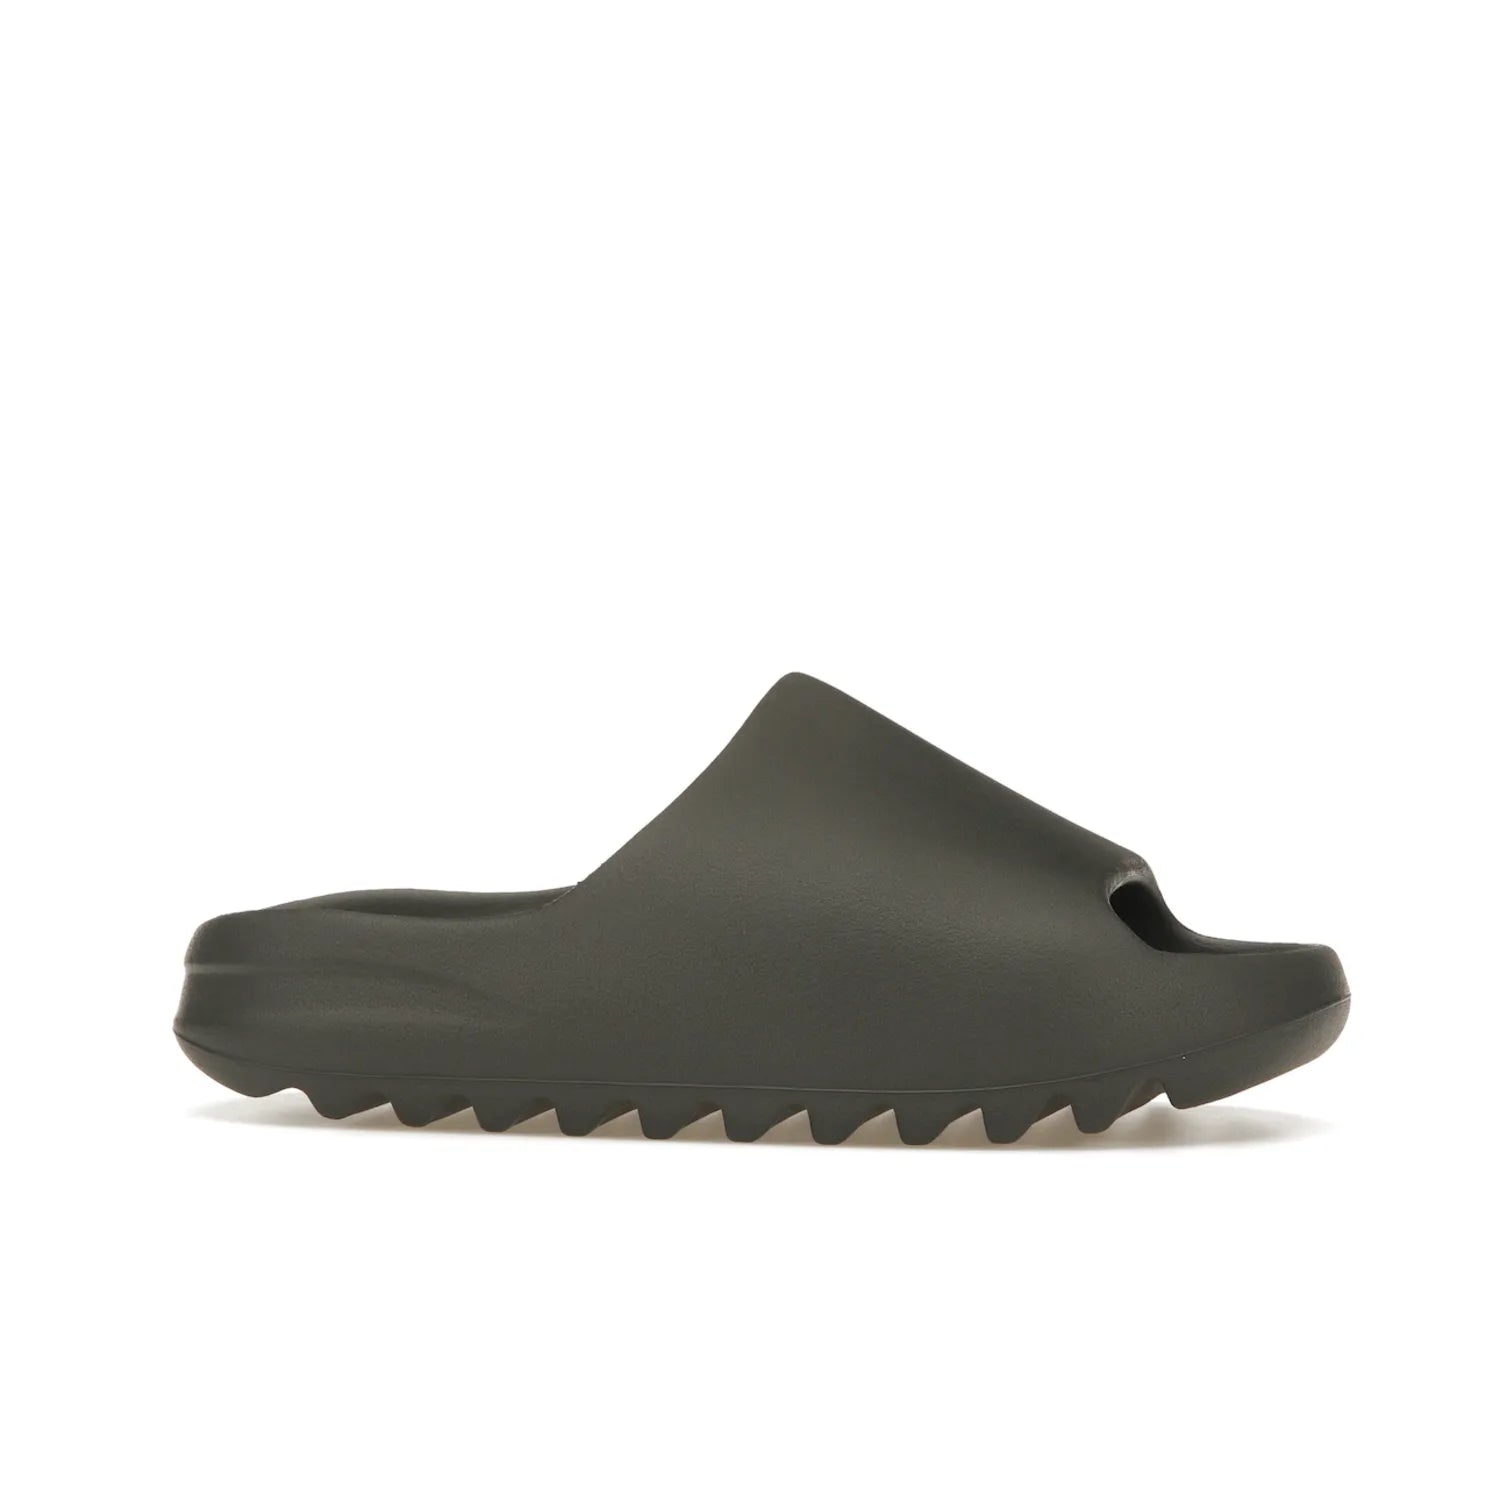 adidas Yeezy Slide Granite - Image 2 - Only at www.BallersClubKickz.com - Introducing the adidas Yeezy Slide Granite with a sleek, soft-to-touch one-piece upper – perfect for making a statement with its minimalistic design and luxurious comfort. Get yours now for only $70.